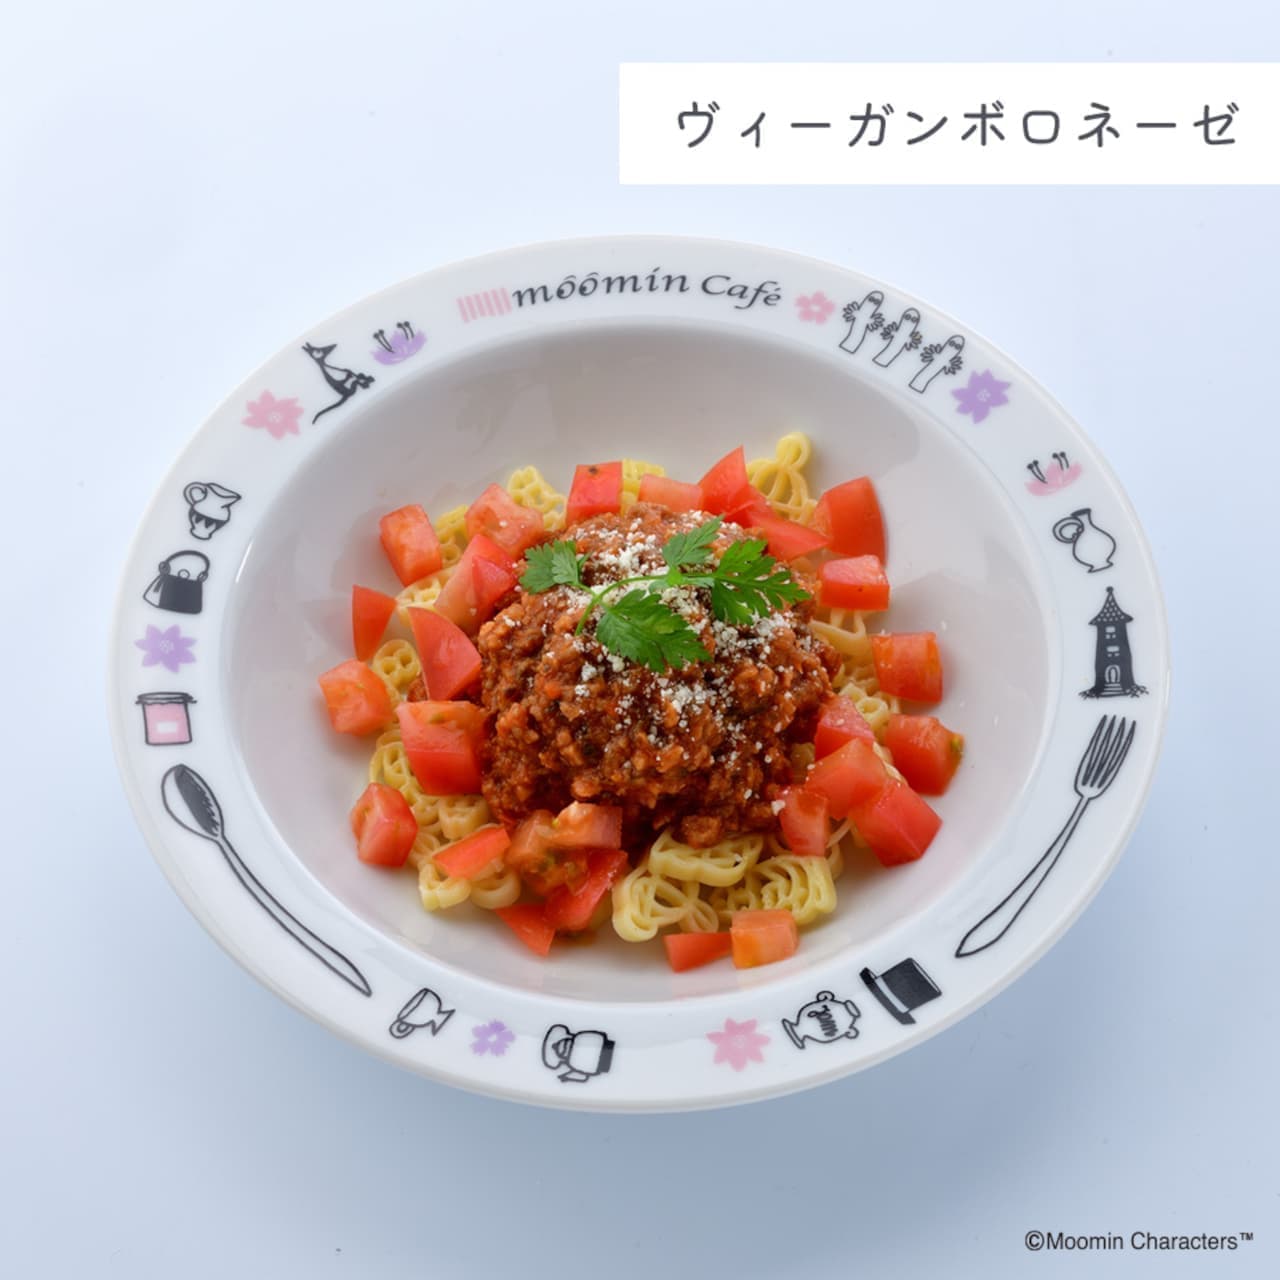 Pasta set produced by Moomin Cafe